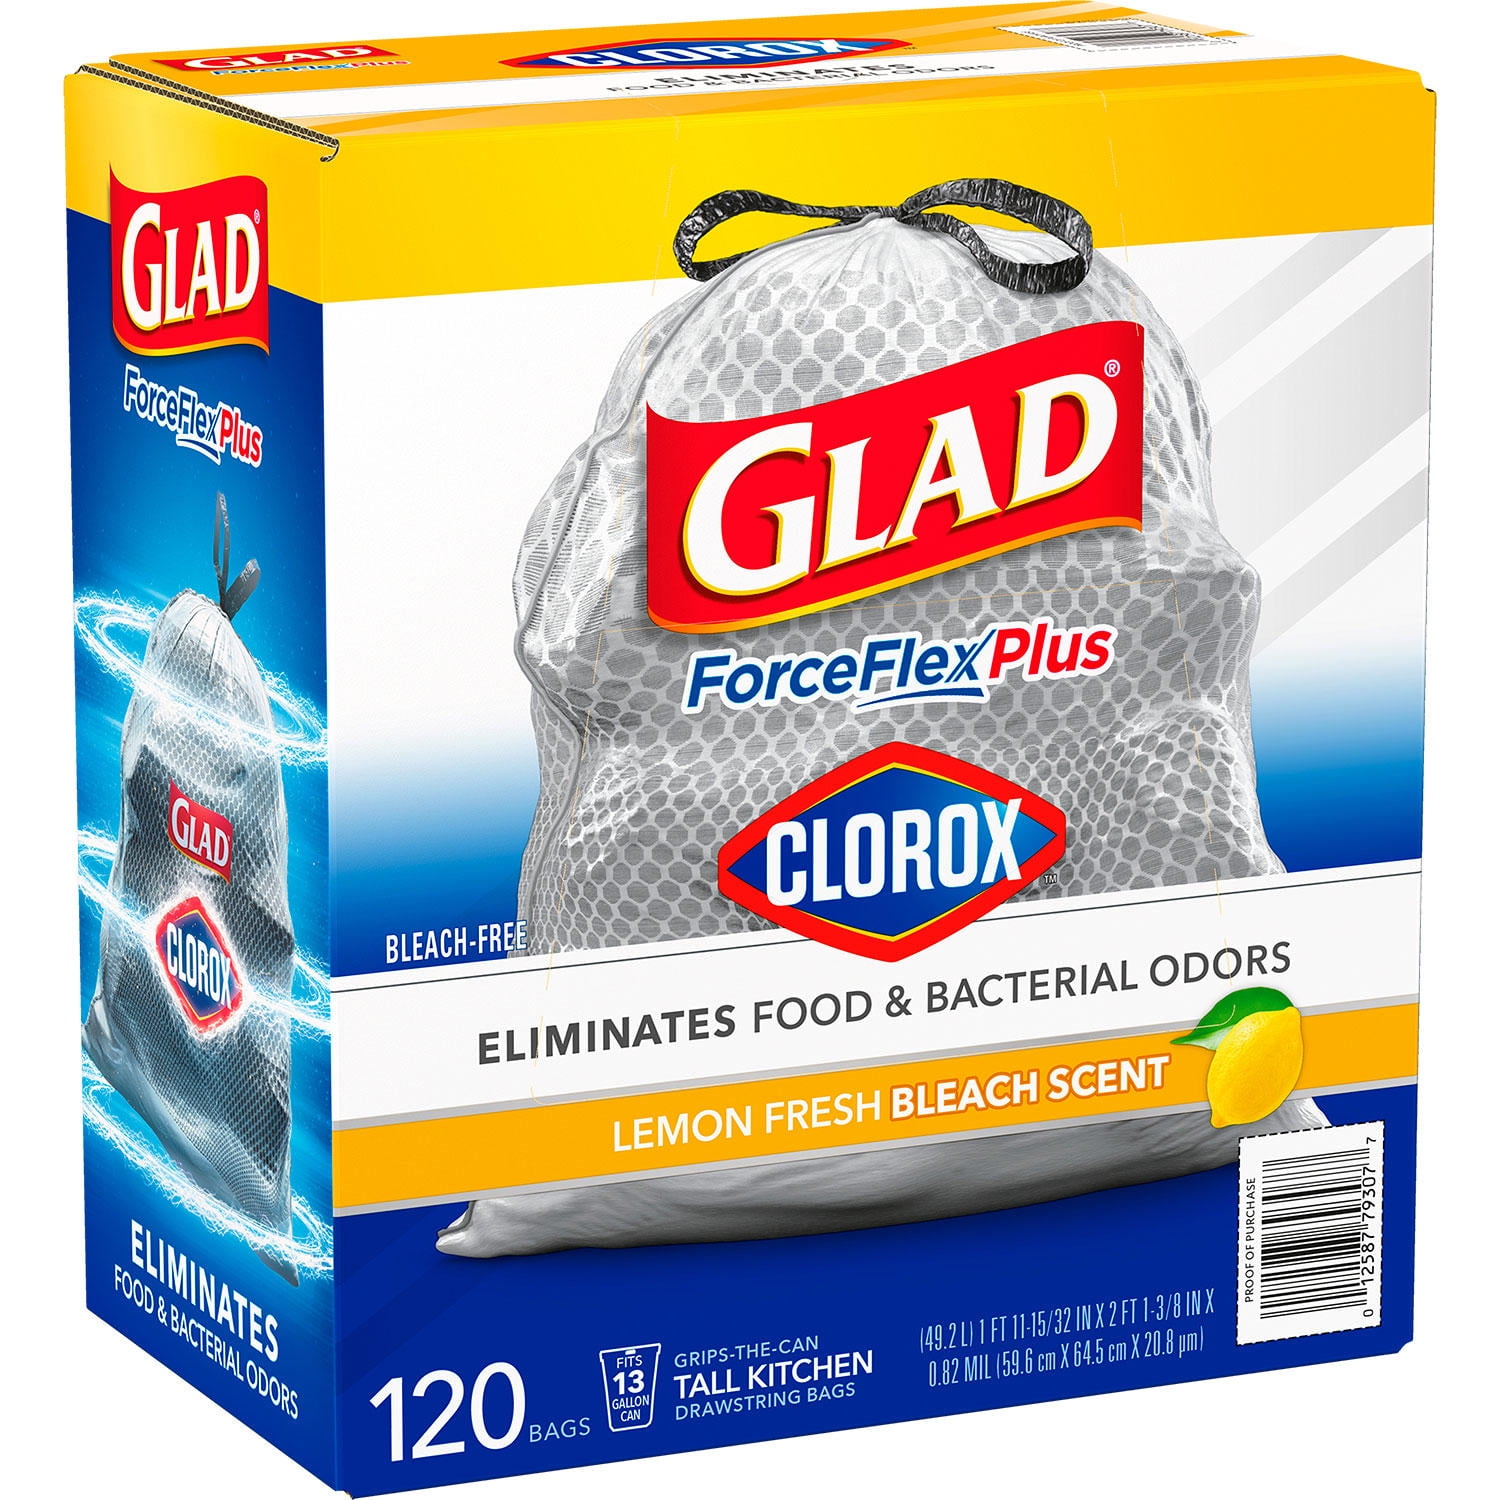 Glad ForceFlexPlus Tall Kitchen Drawstring Trash Bags, 13 Gallon Grey Trash  Bag, Gain Original with Febreze Freshness 34 Count (Package May Vary) -  Klatchit